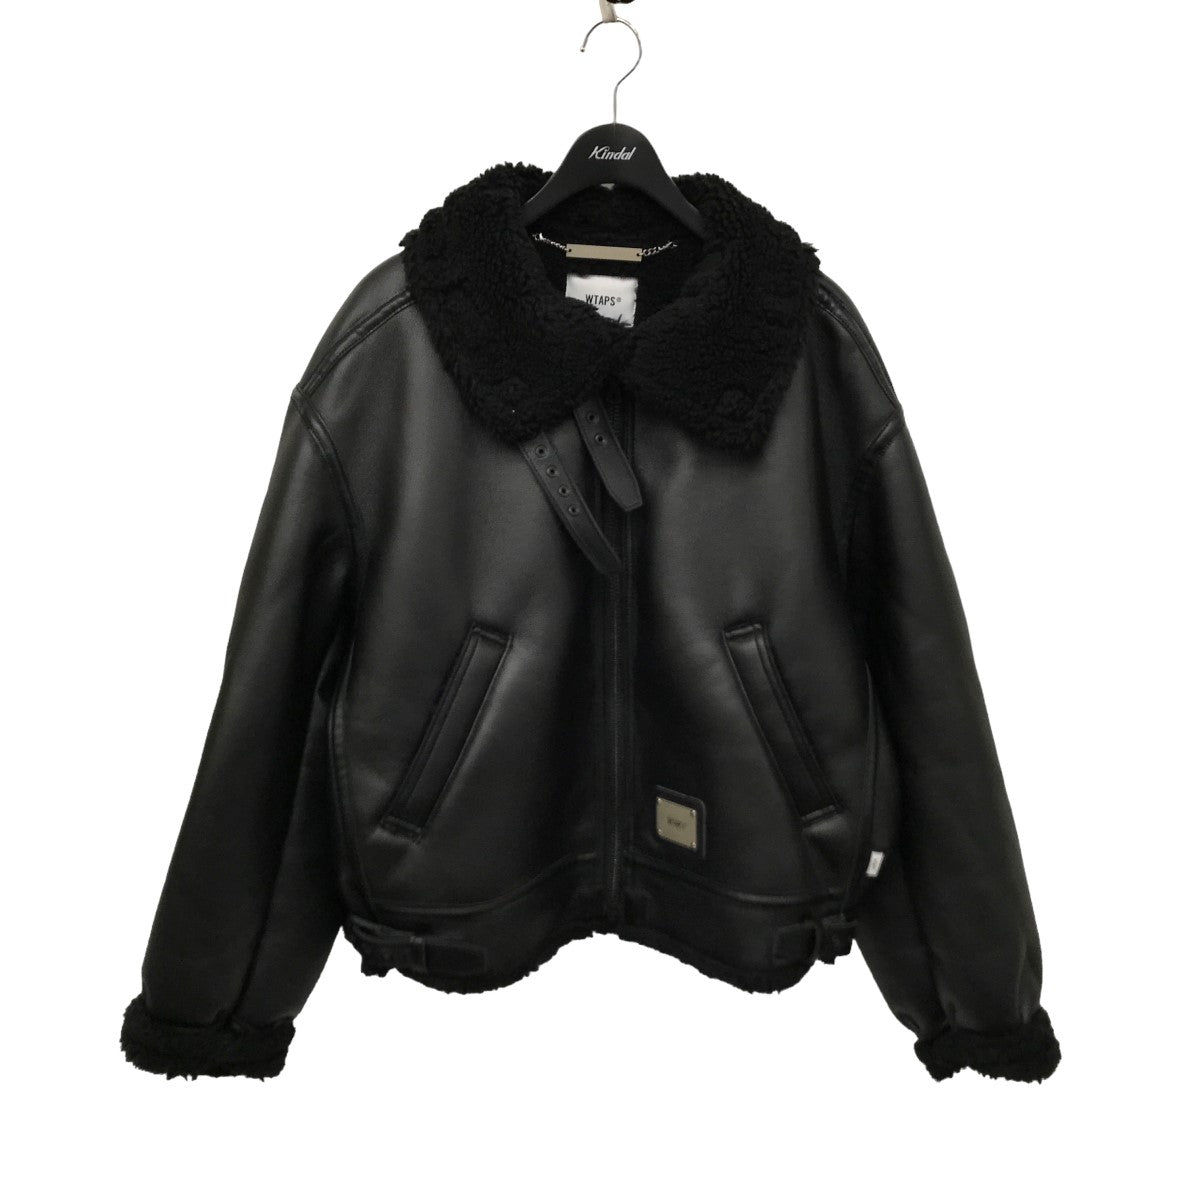 WTAPS(ダブルタップス) 22AW JFW-02 JACKET SYNTHETIC フェイク ...